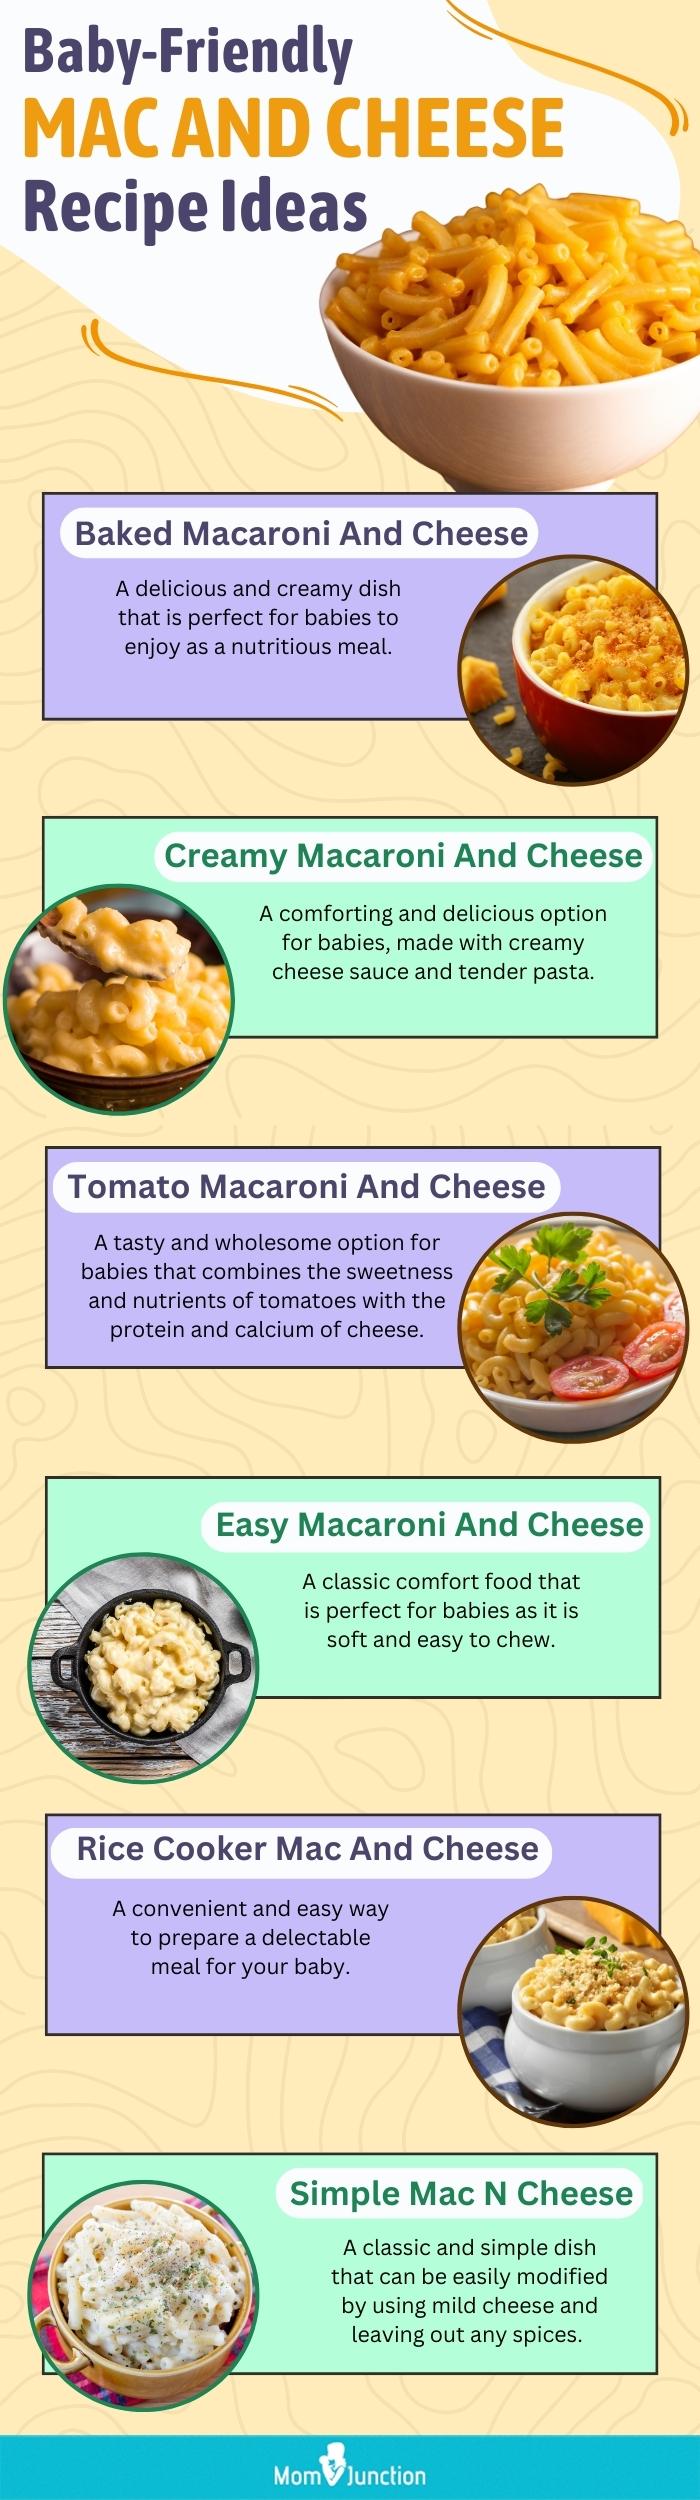 baby friendly mac and cheese recipe ideas (infographic)